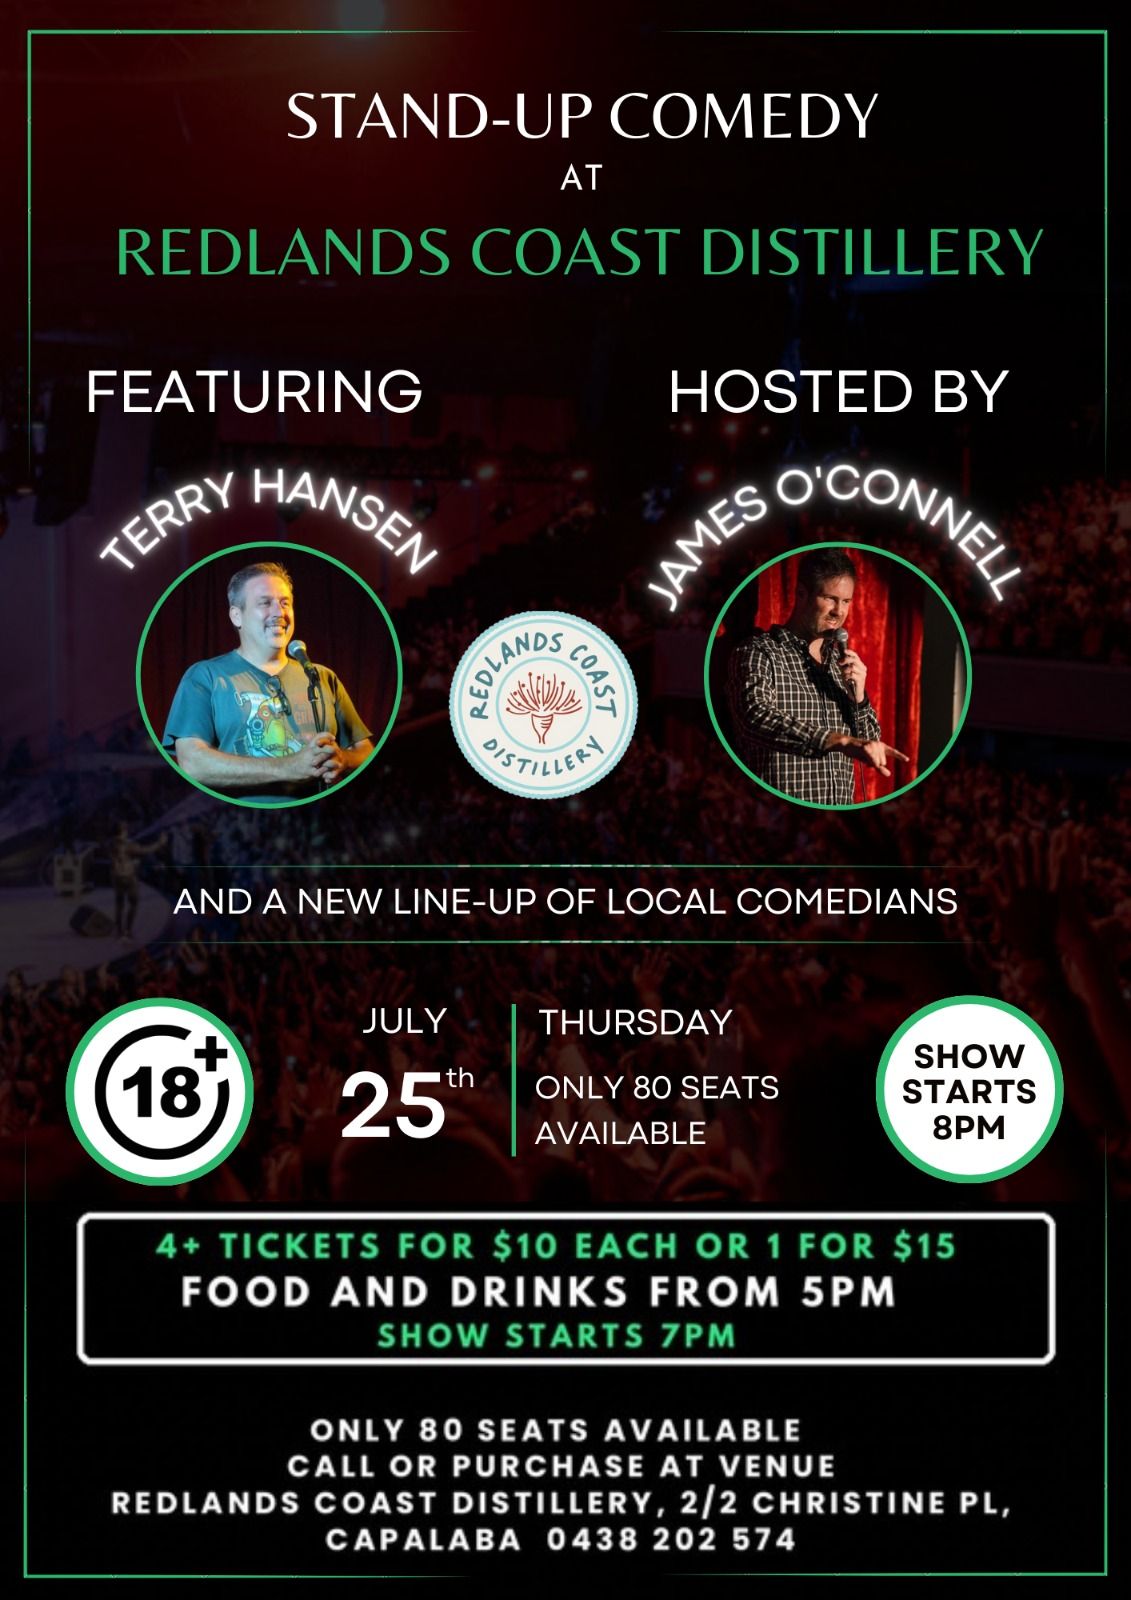 Stand-up Comedy at Redlands Coast Distillery